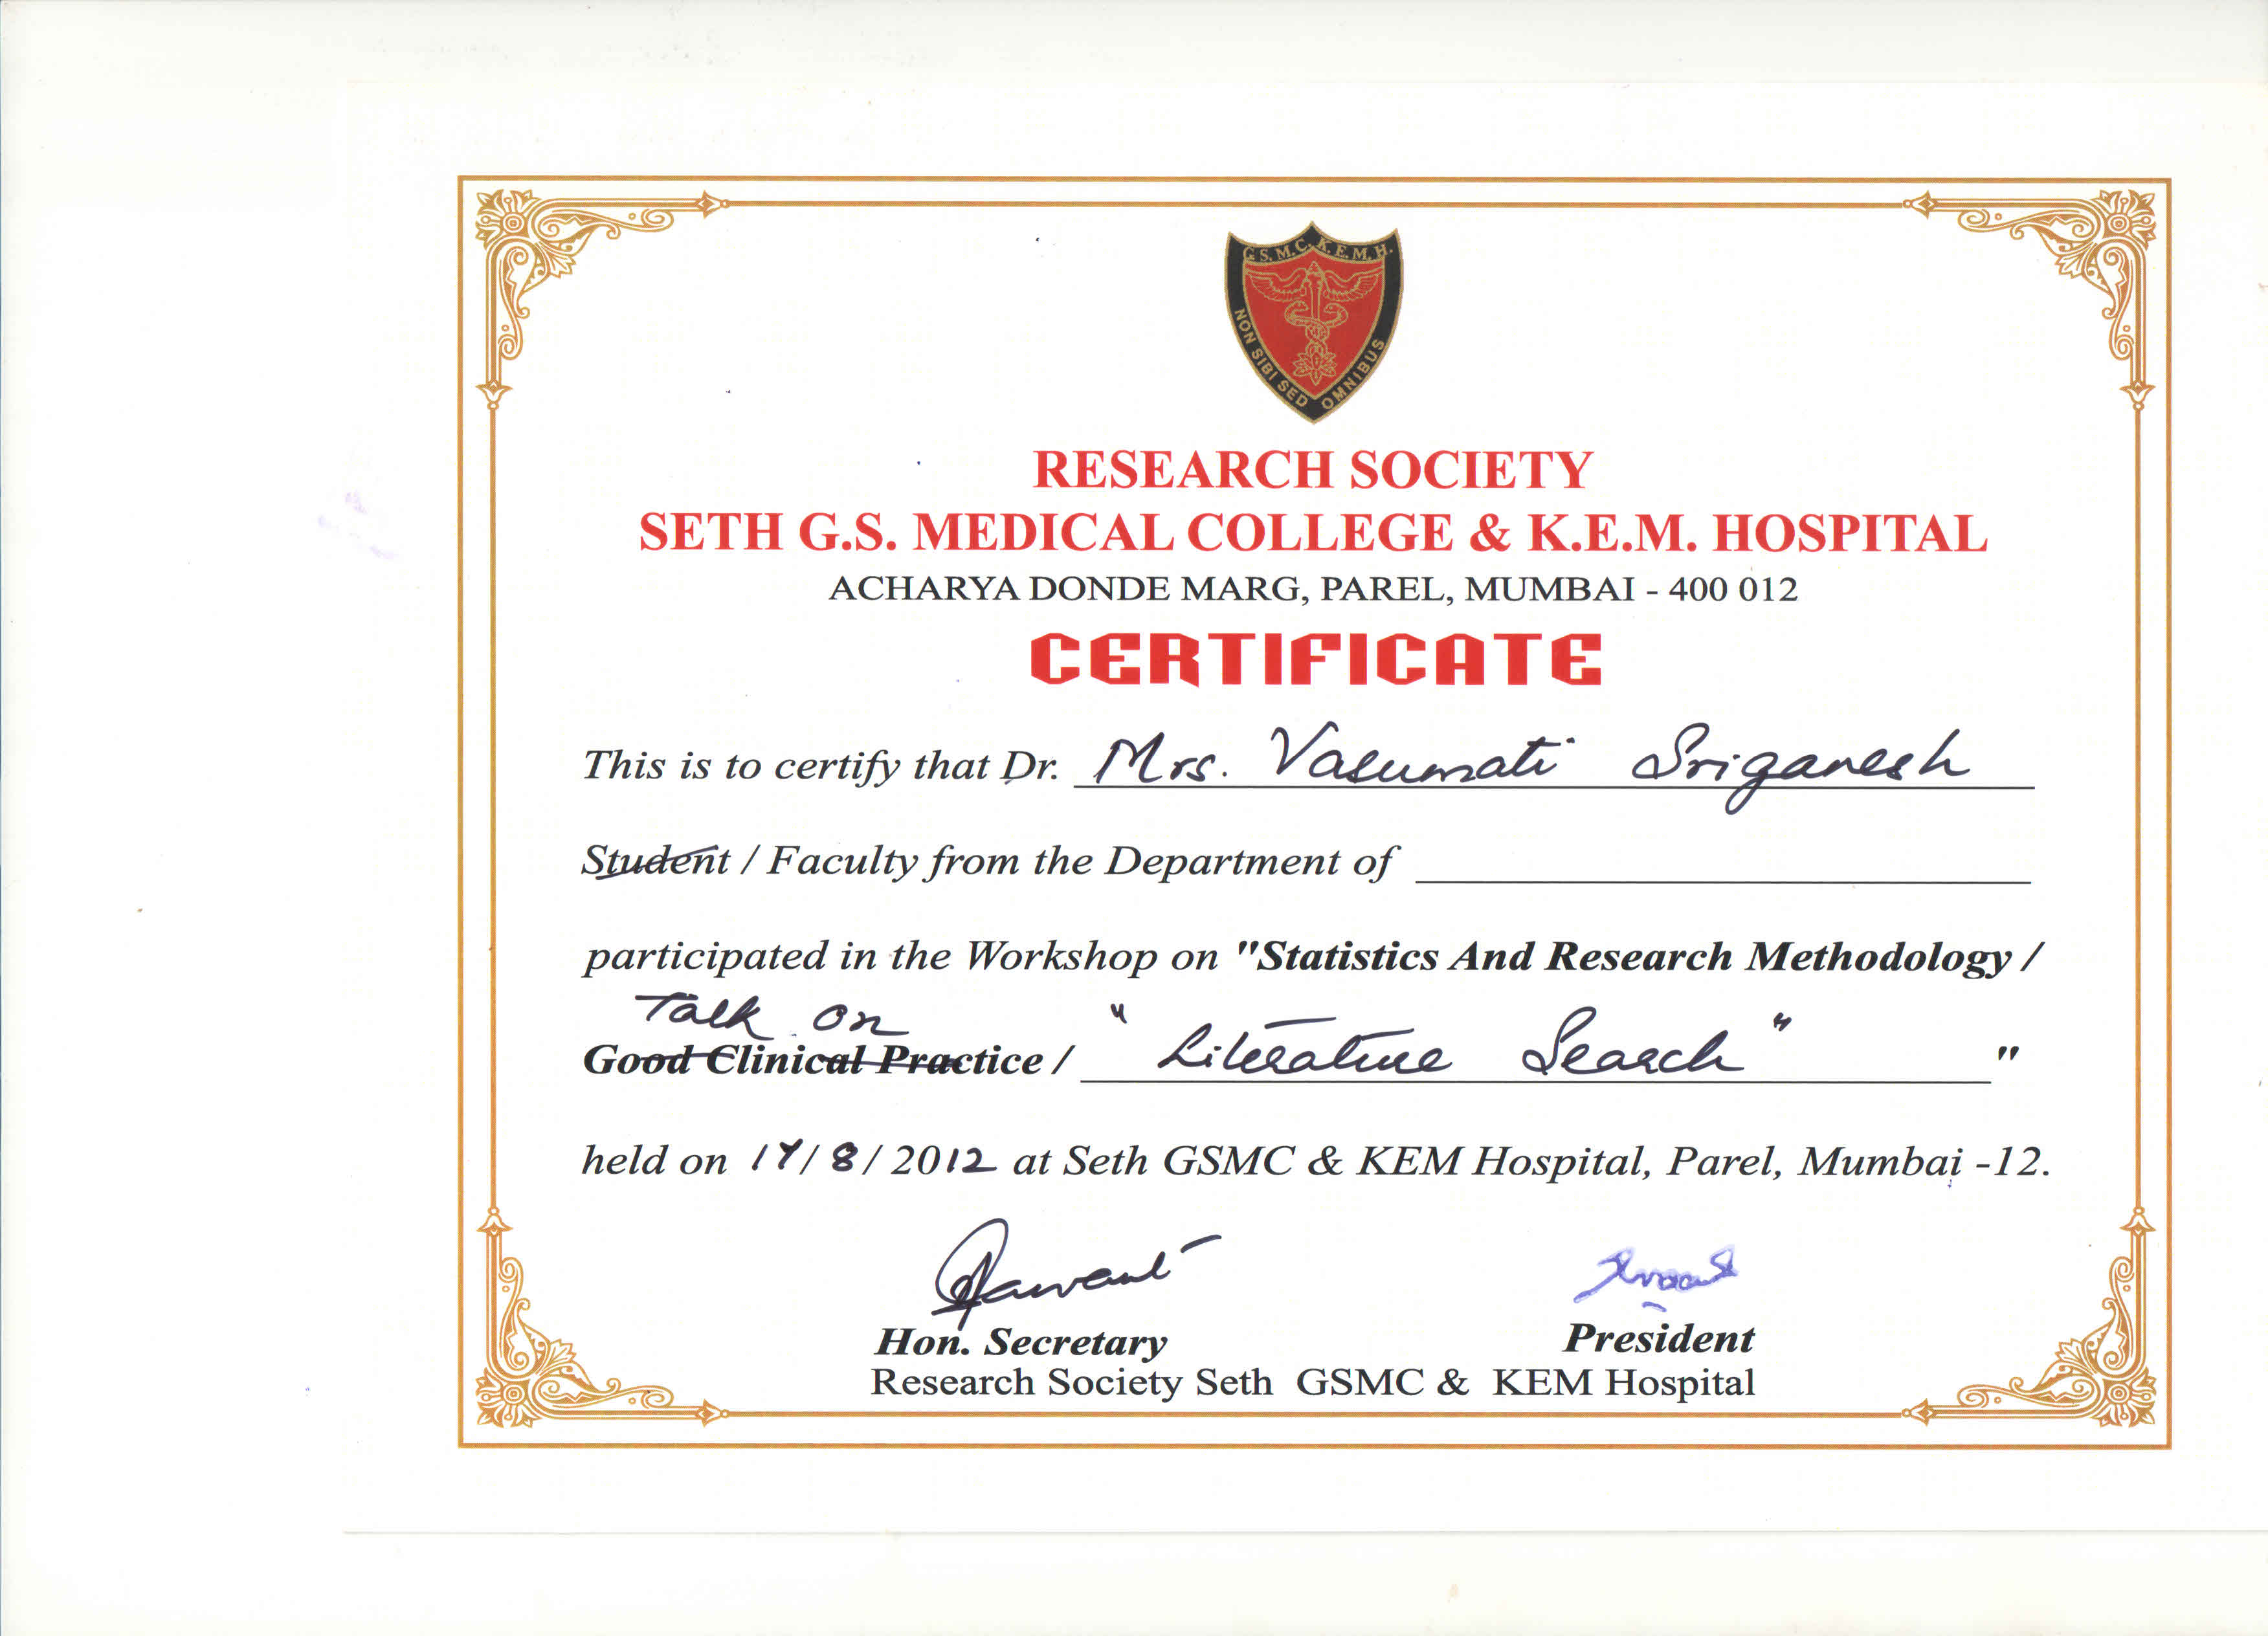 Seth GS Medical College and KEM Hospital-Lecture